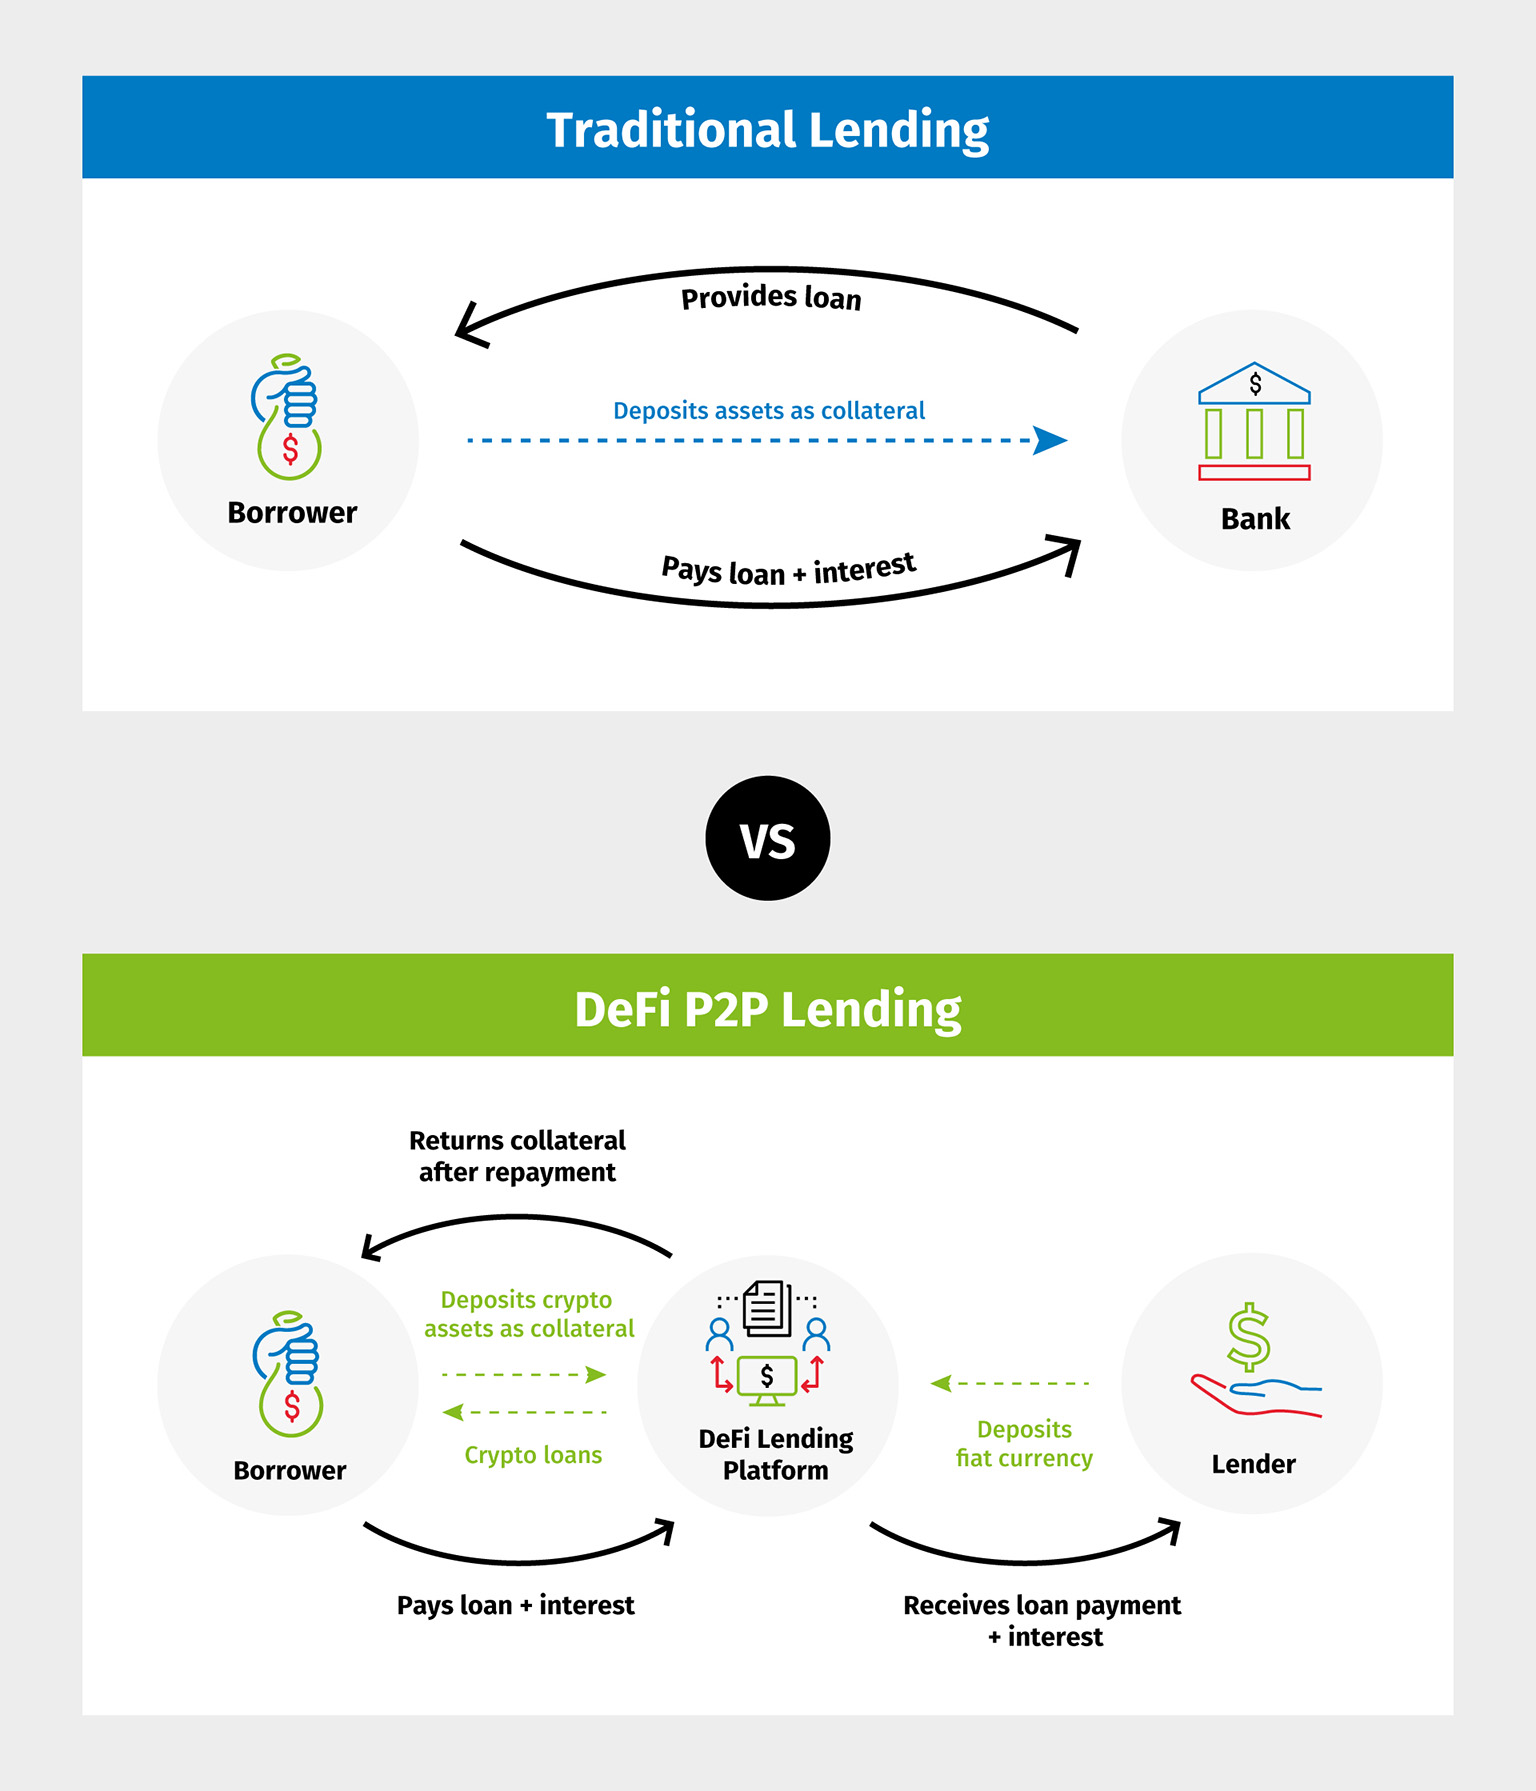 Traditional lending workflow